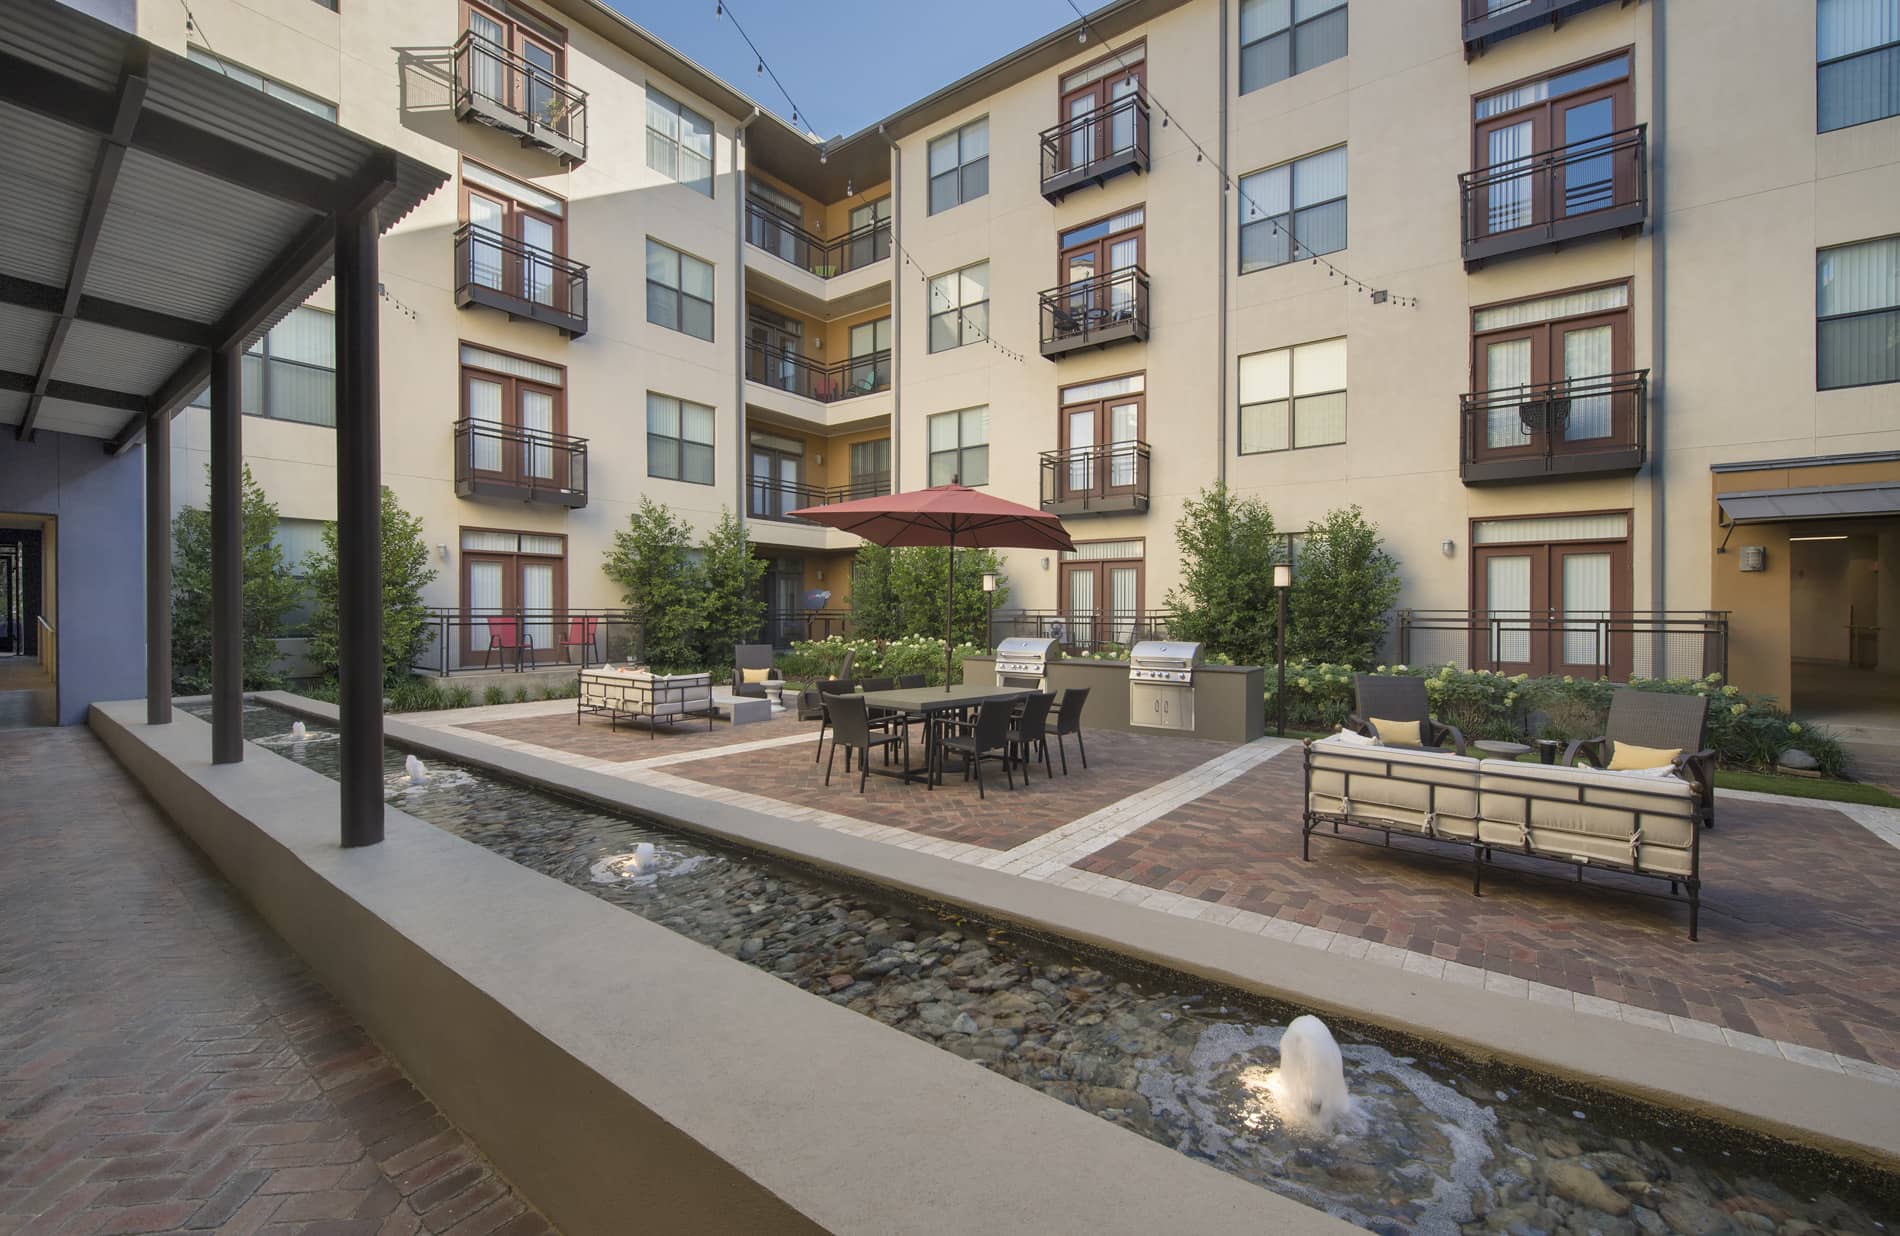 Legacy Village Apartment Homes Patio and Grilling Area